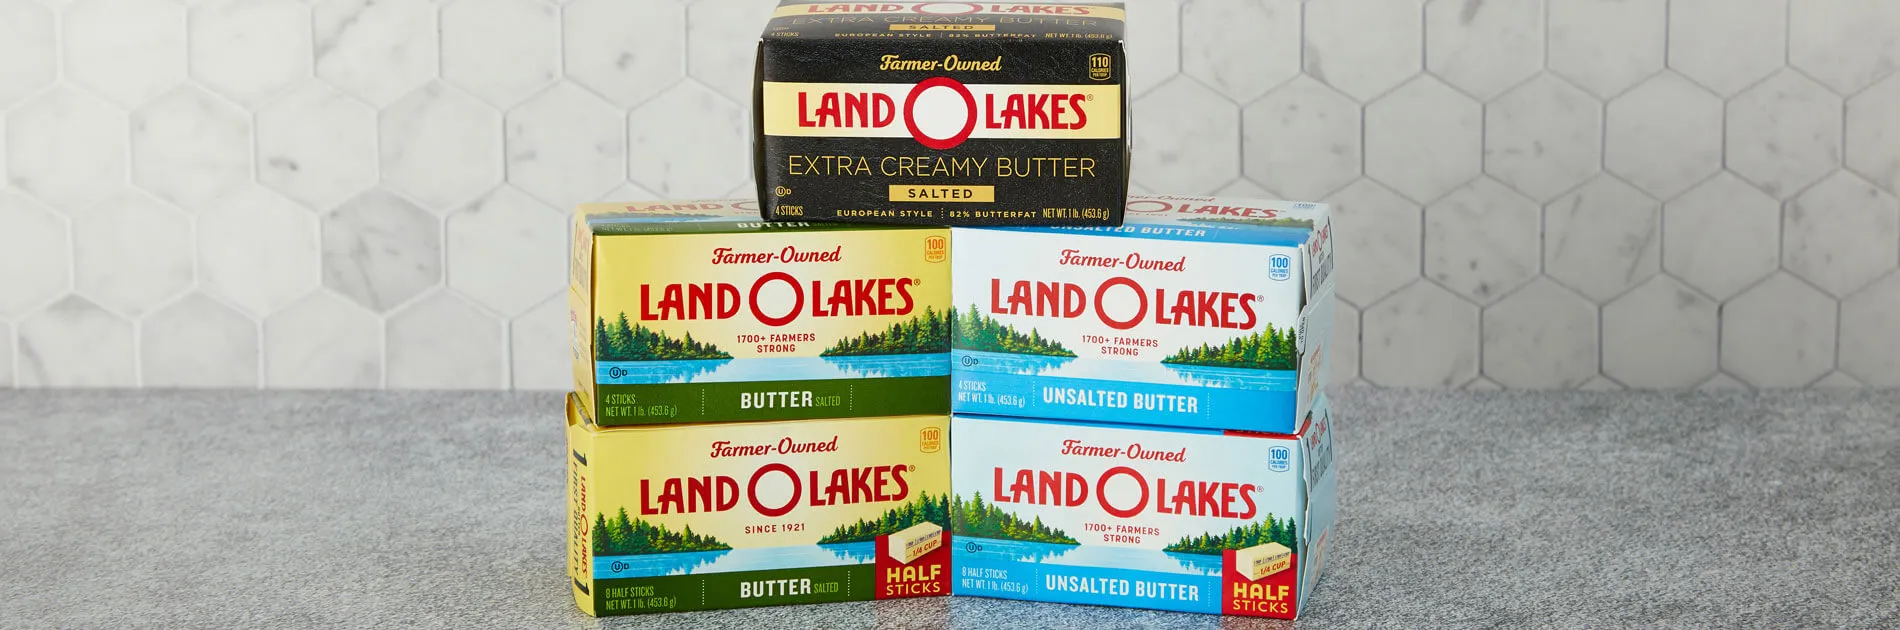 salted and unsalted butter boxes